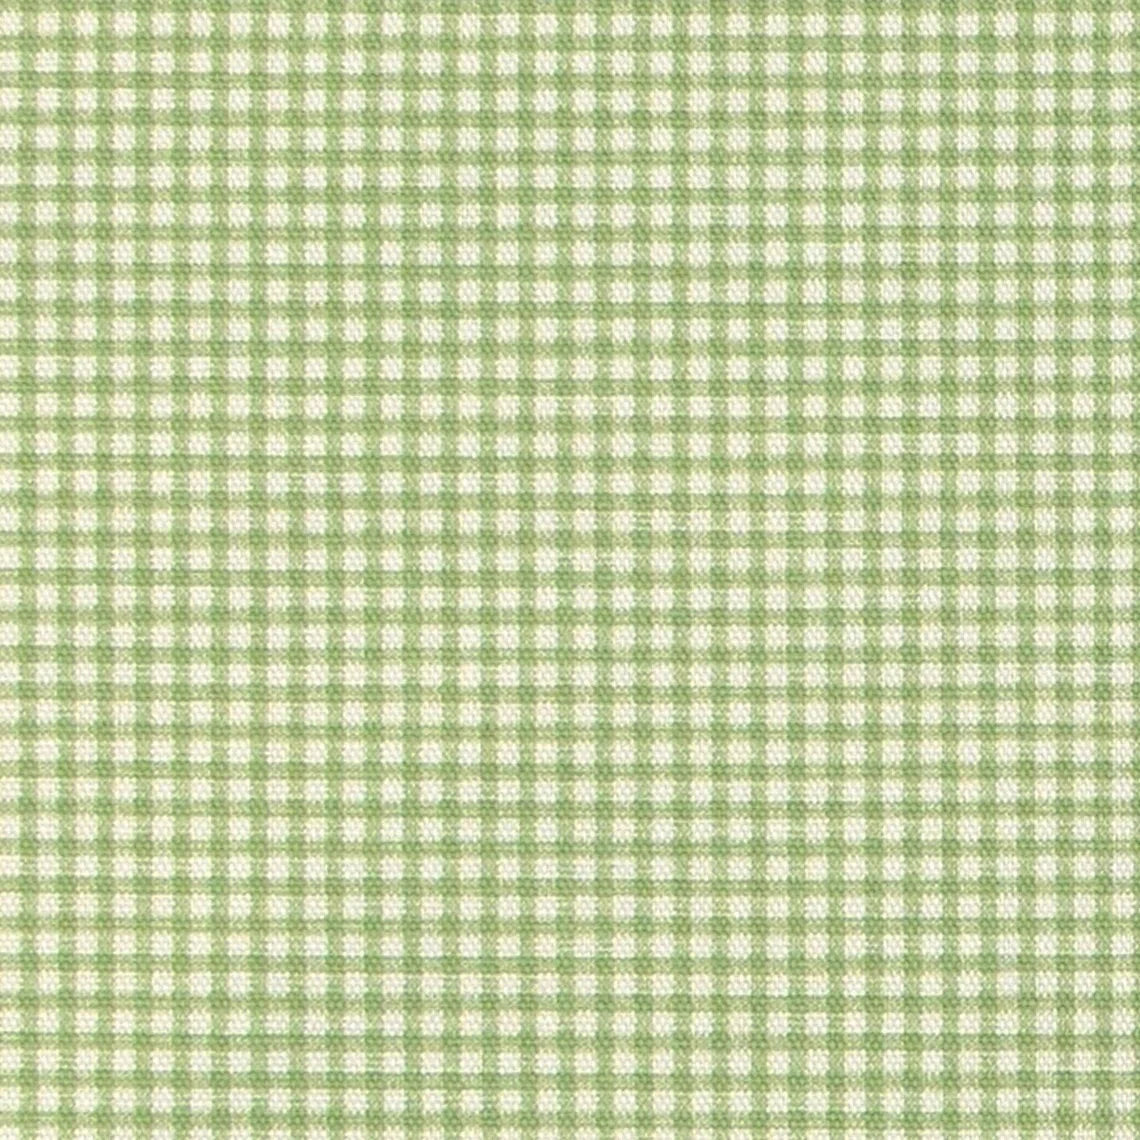 pinch pleated curtain panels pair in farmhouse jungle green gingham check